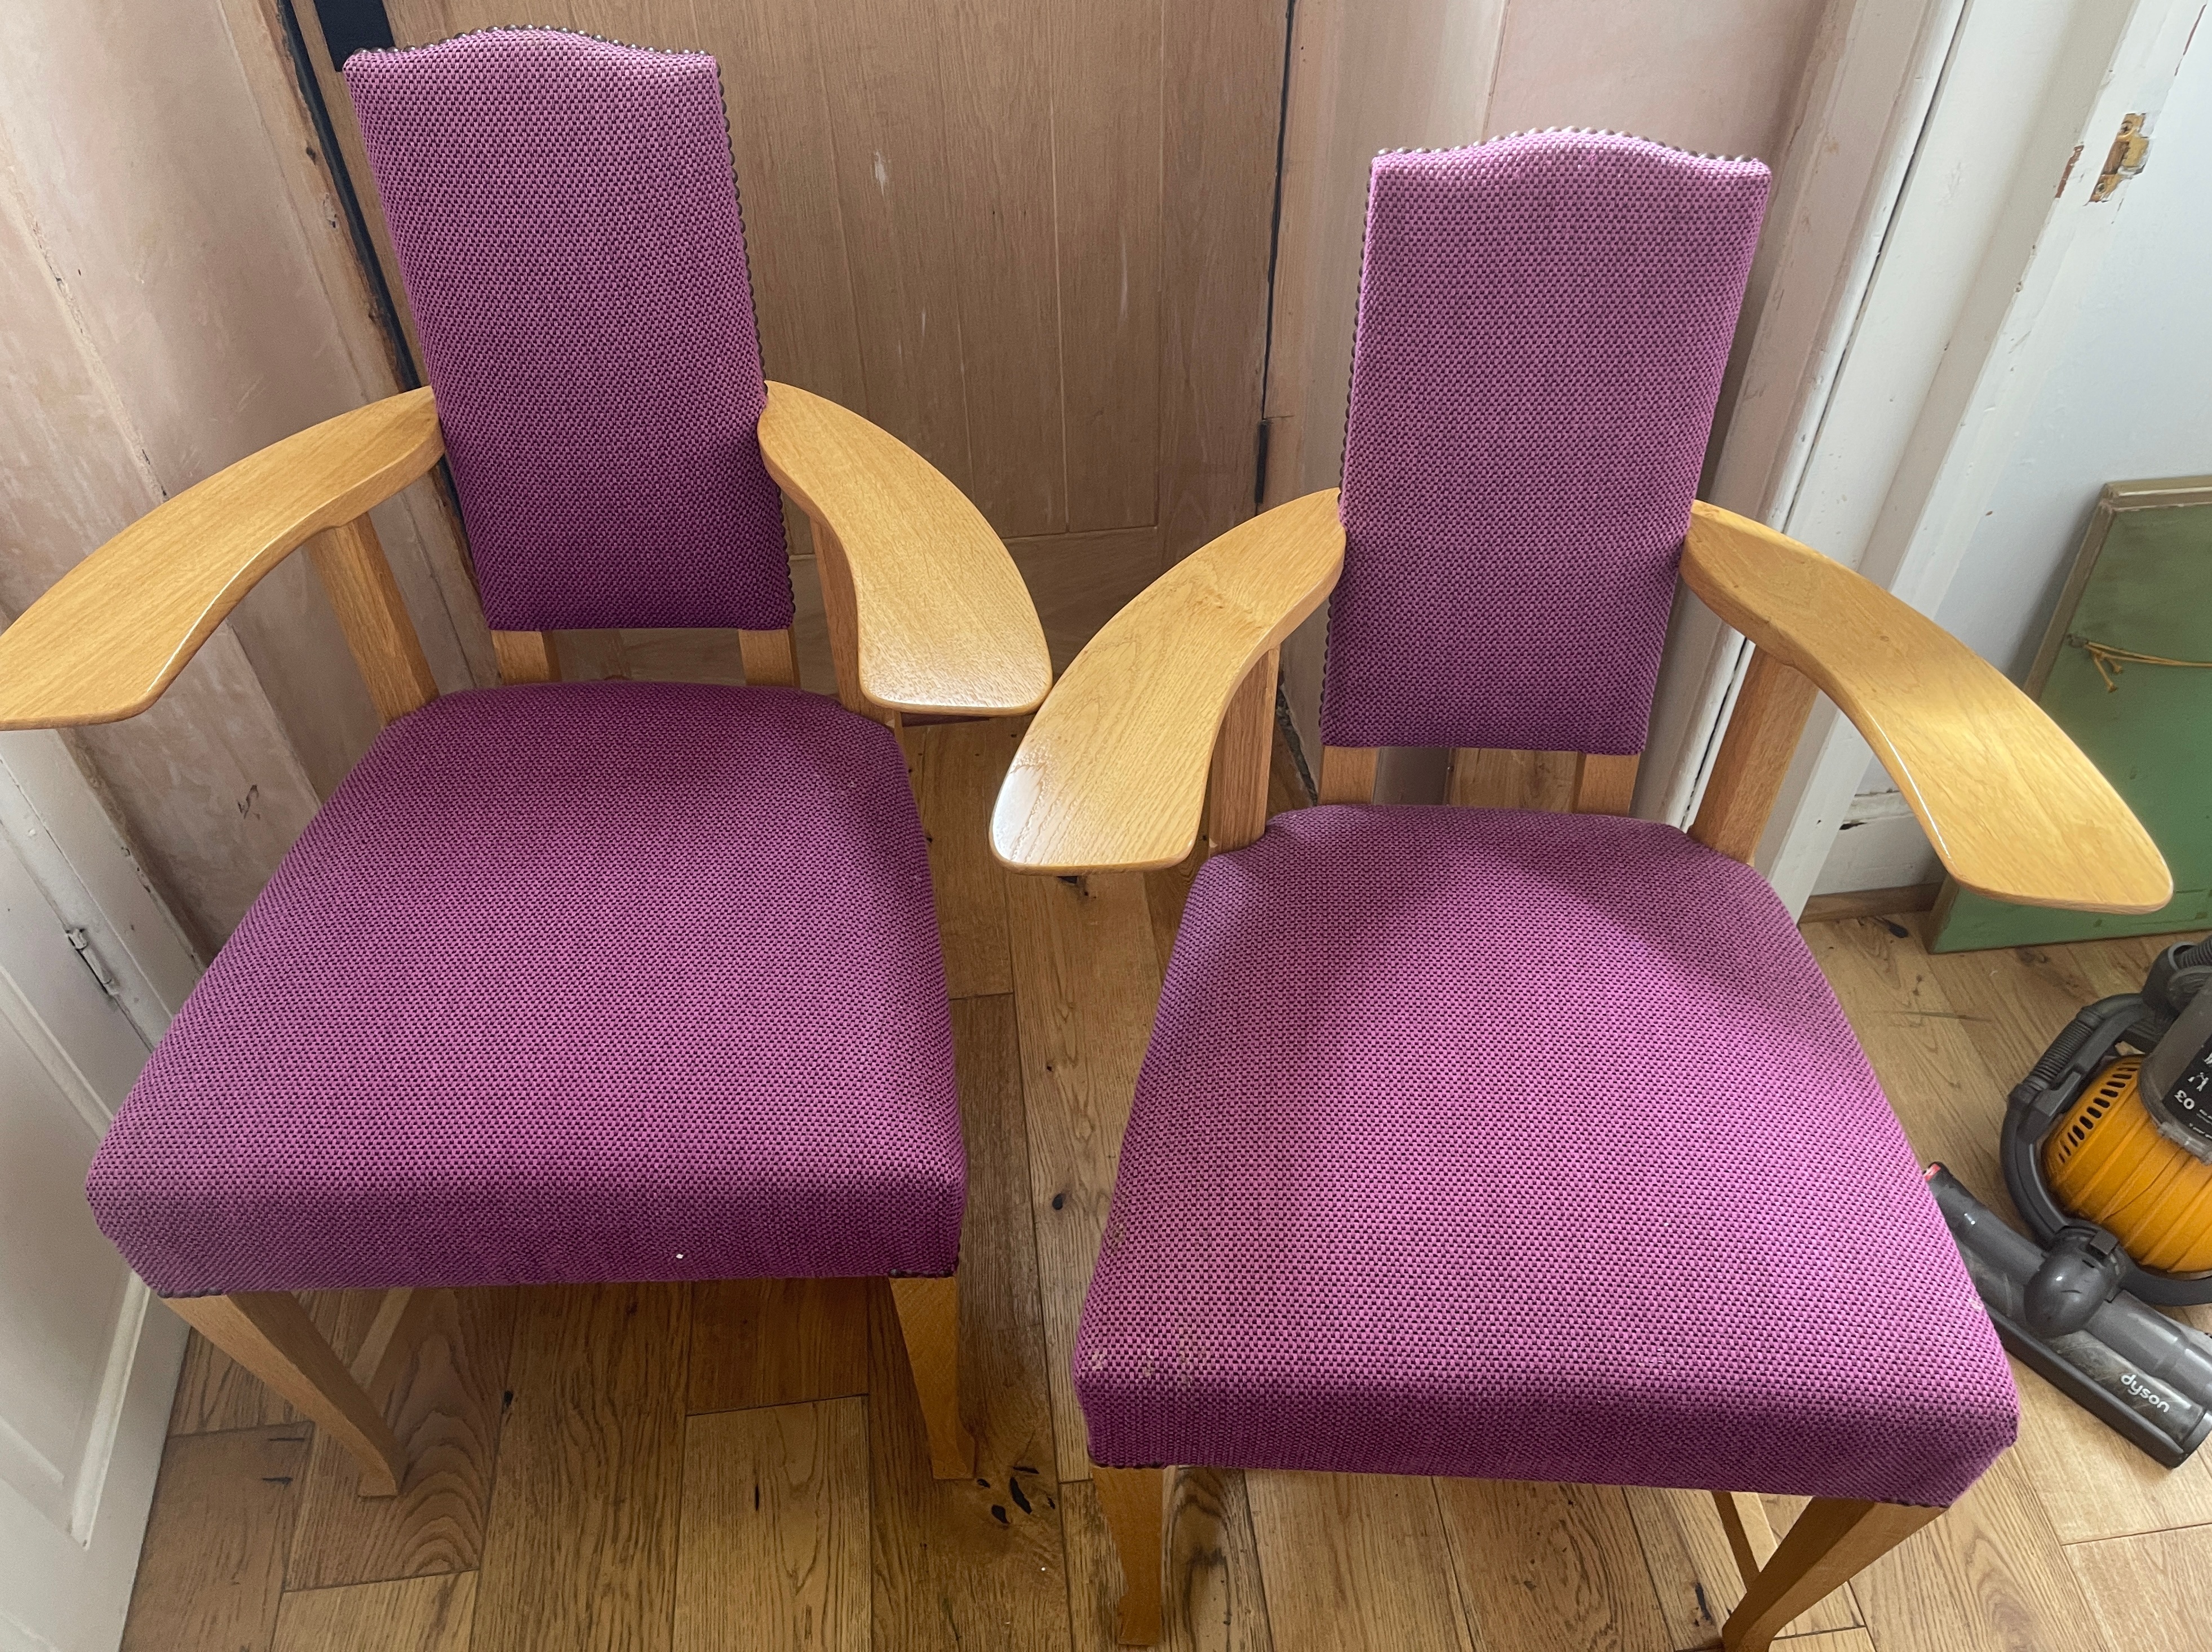 Gavin Robertson Bespoke Furniture Maker Pair of Arts Crafts Style Chairs in Oak - 37" tall seat 21"